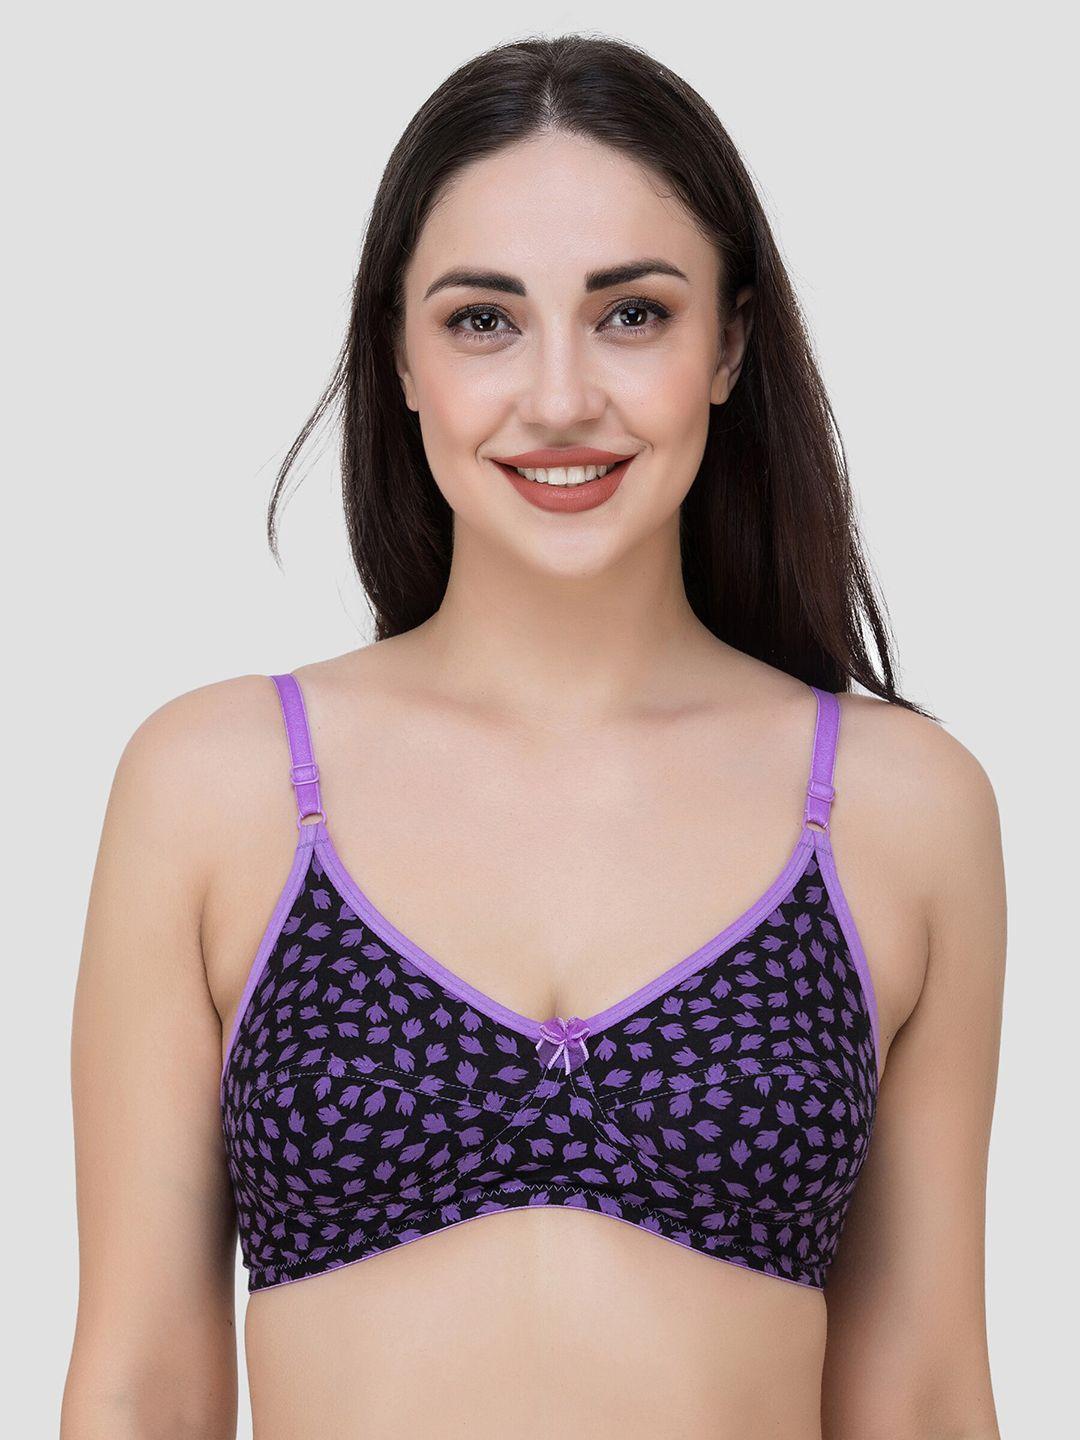 fasense black & purple printed non-padded non-wired everyday bra bv005a